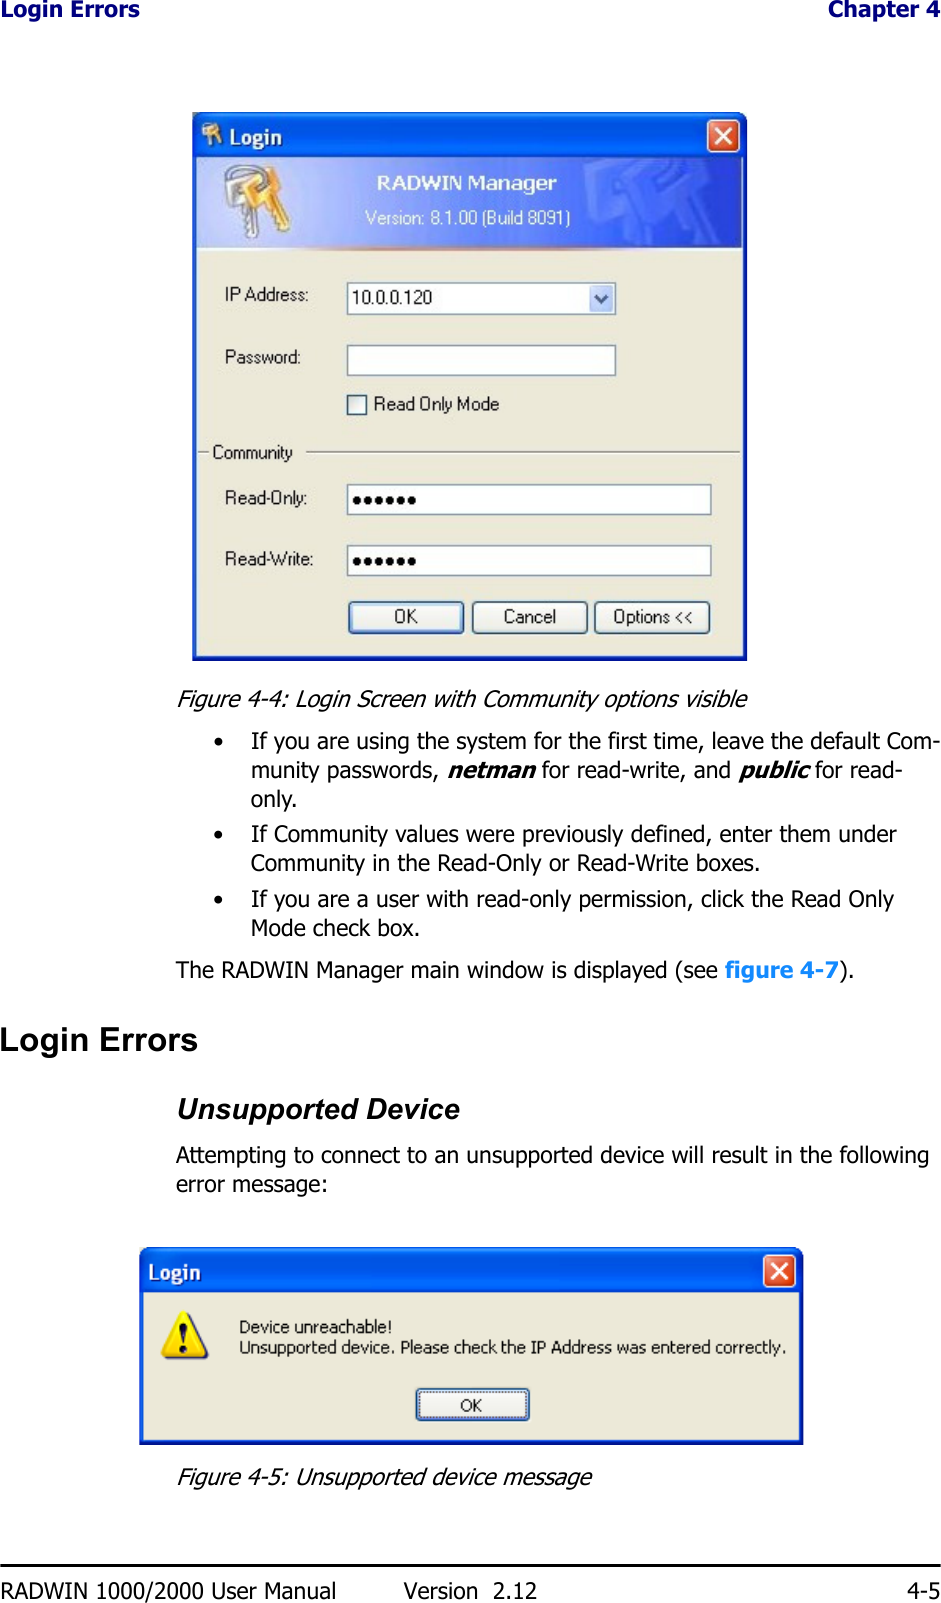 Login Errors  Chapter 4RADWIN 1000/2000 User Manual Version  2.12 4-5Figure 4-4: Login Screen with Community options visible• If you are using the system for the first time, leave the default Com-munity passwords, netman for read-write, and public for read-only.• If Community values were previously defined, enter them under Community in the Read-Only or Read-Write boxes.• If you are a user with read-only permission, click the Read Only Mode check box.The RADWIN Manager main window is displayed (see figure 4-7).Login ErrorsUnsupported DeviceAttempting to connect to an unsupported device will result in the following error message:Figure 4-5: Unsupported device message